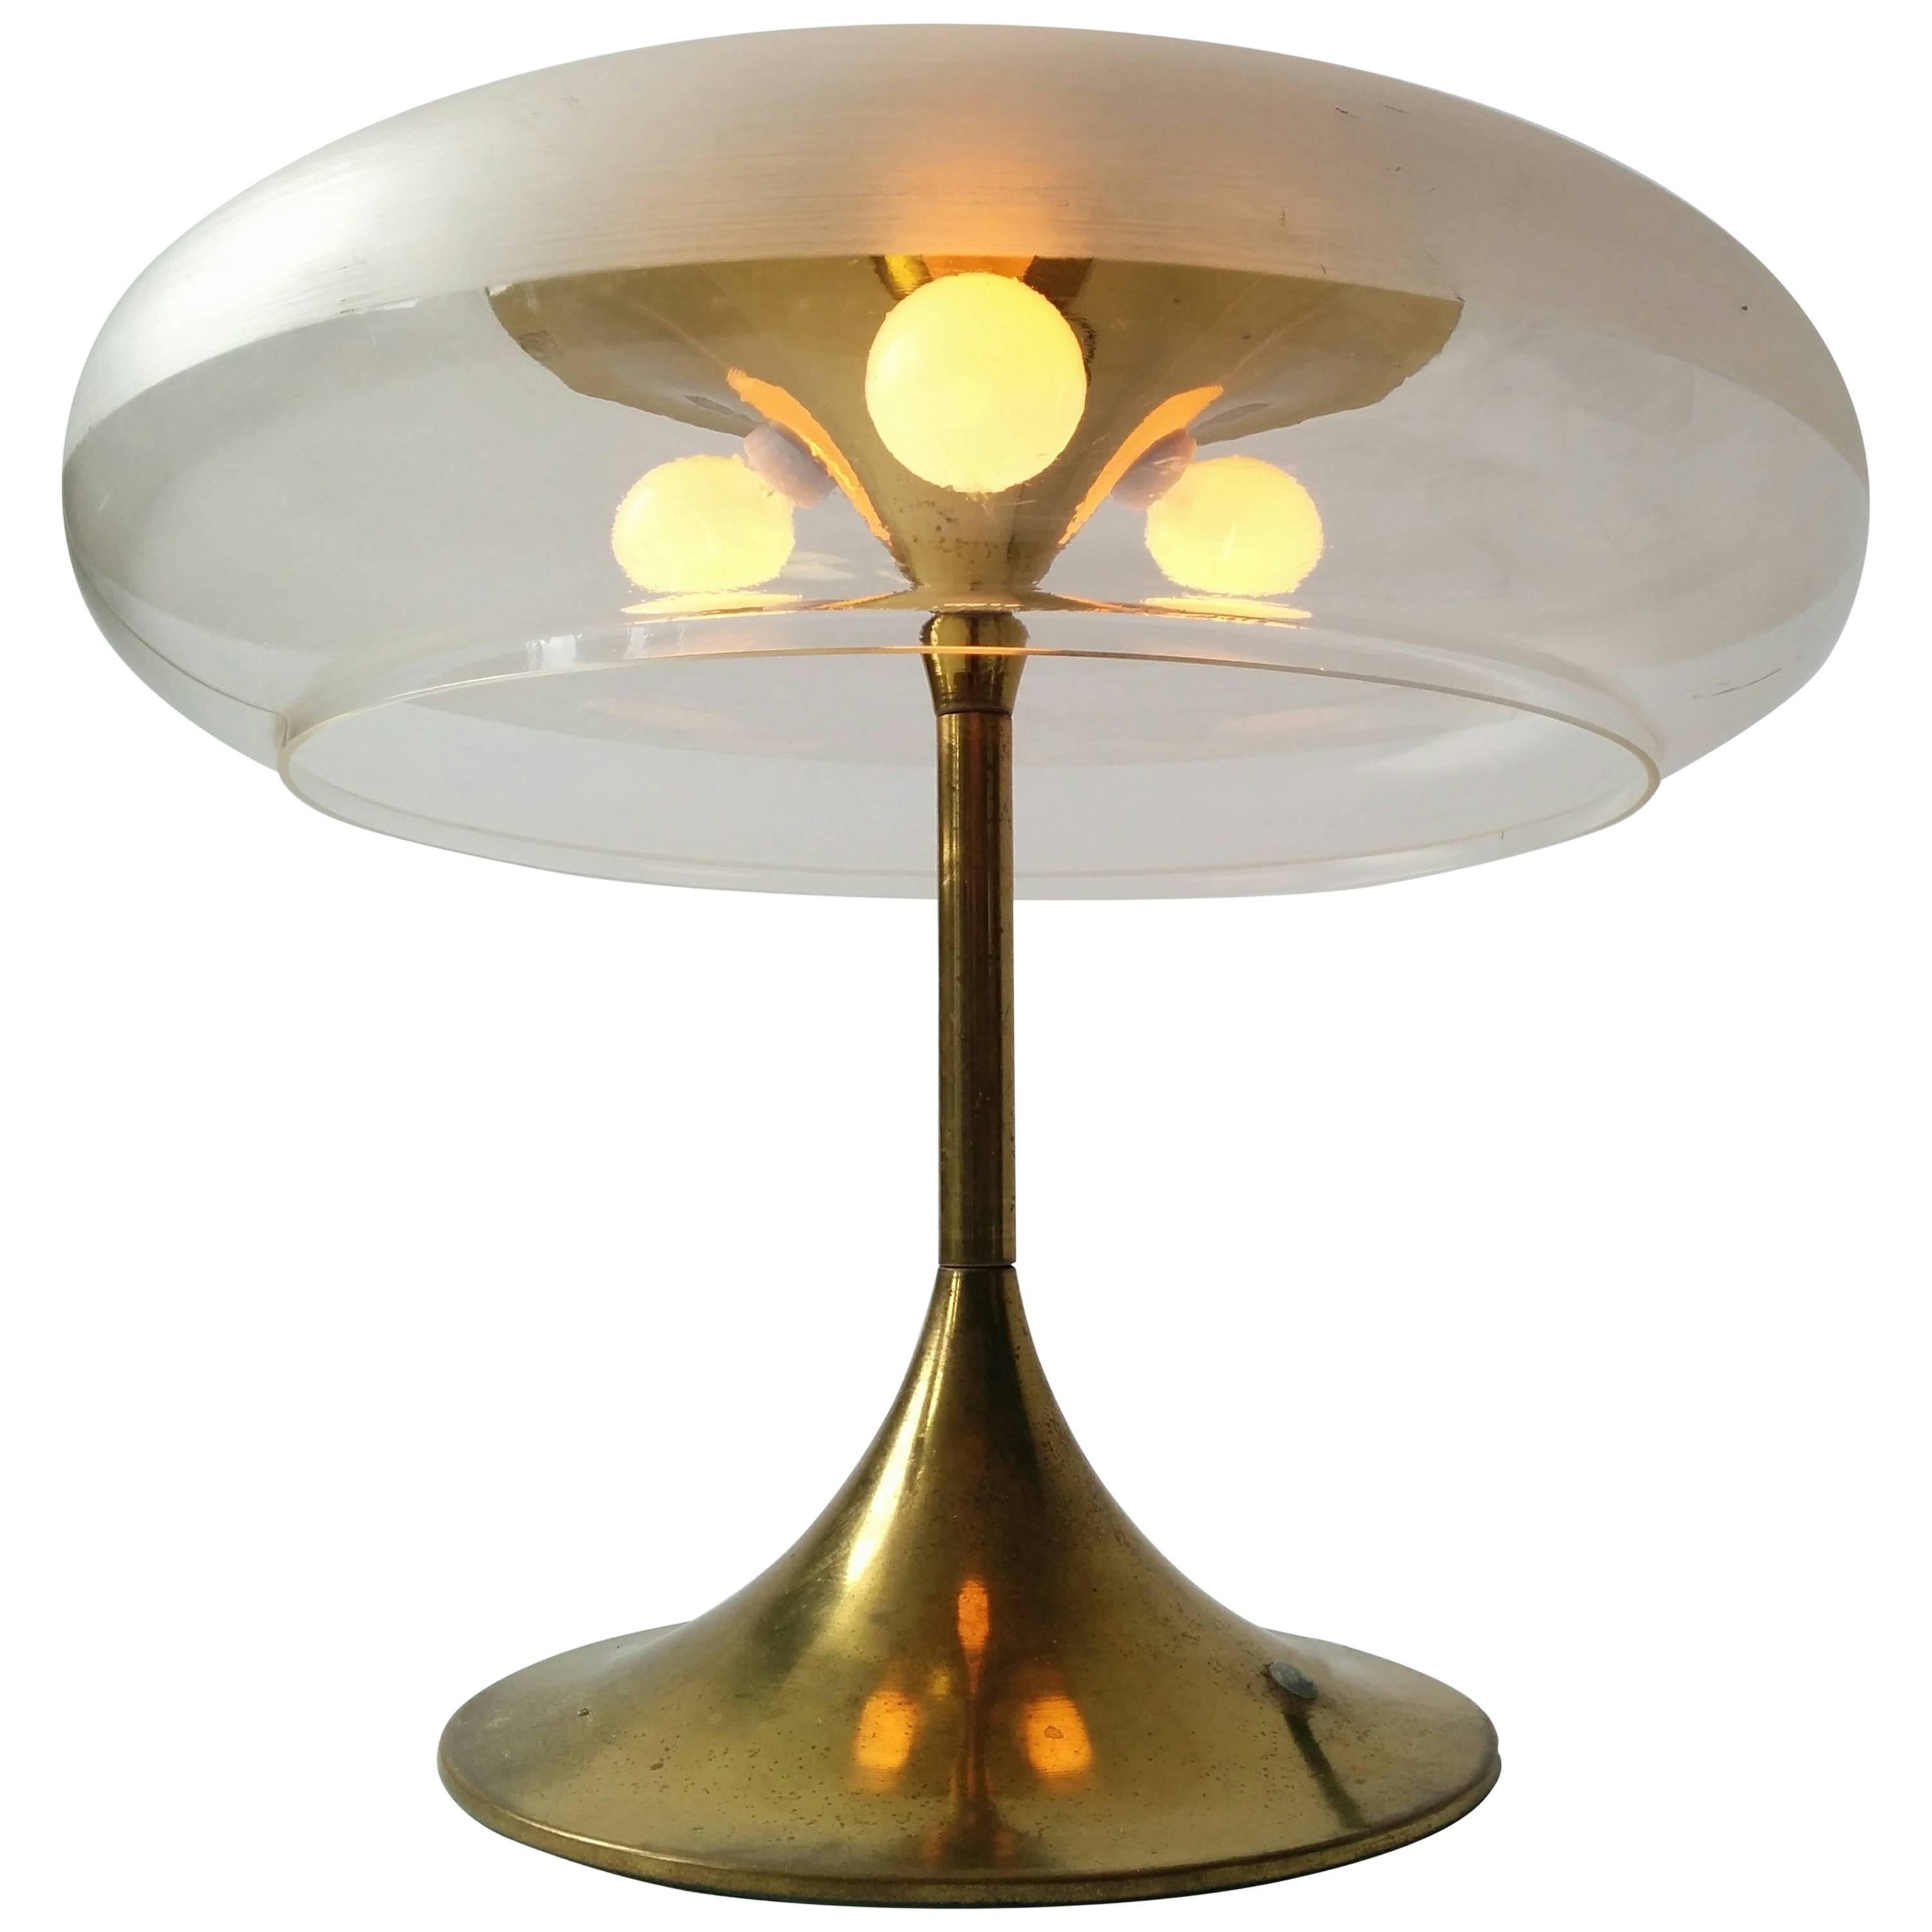 Reggiani  Brass and Clear Acrylic Shade Table Lamp , 1960s , Italy  